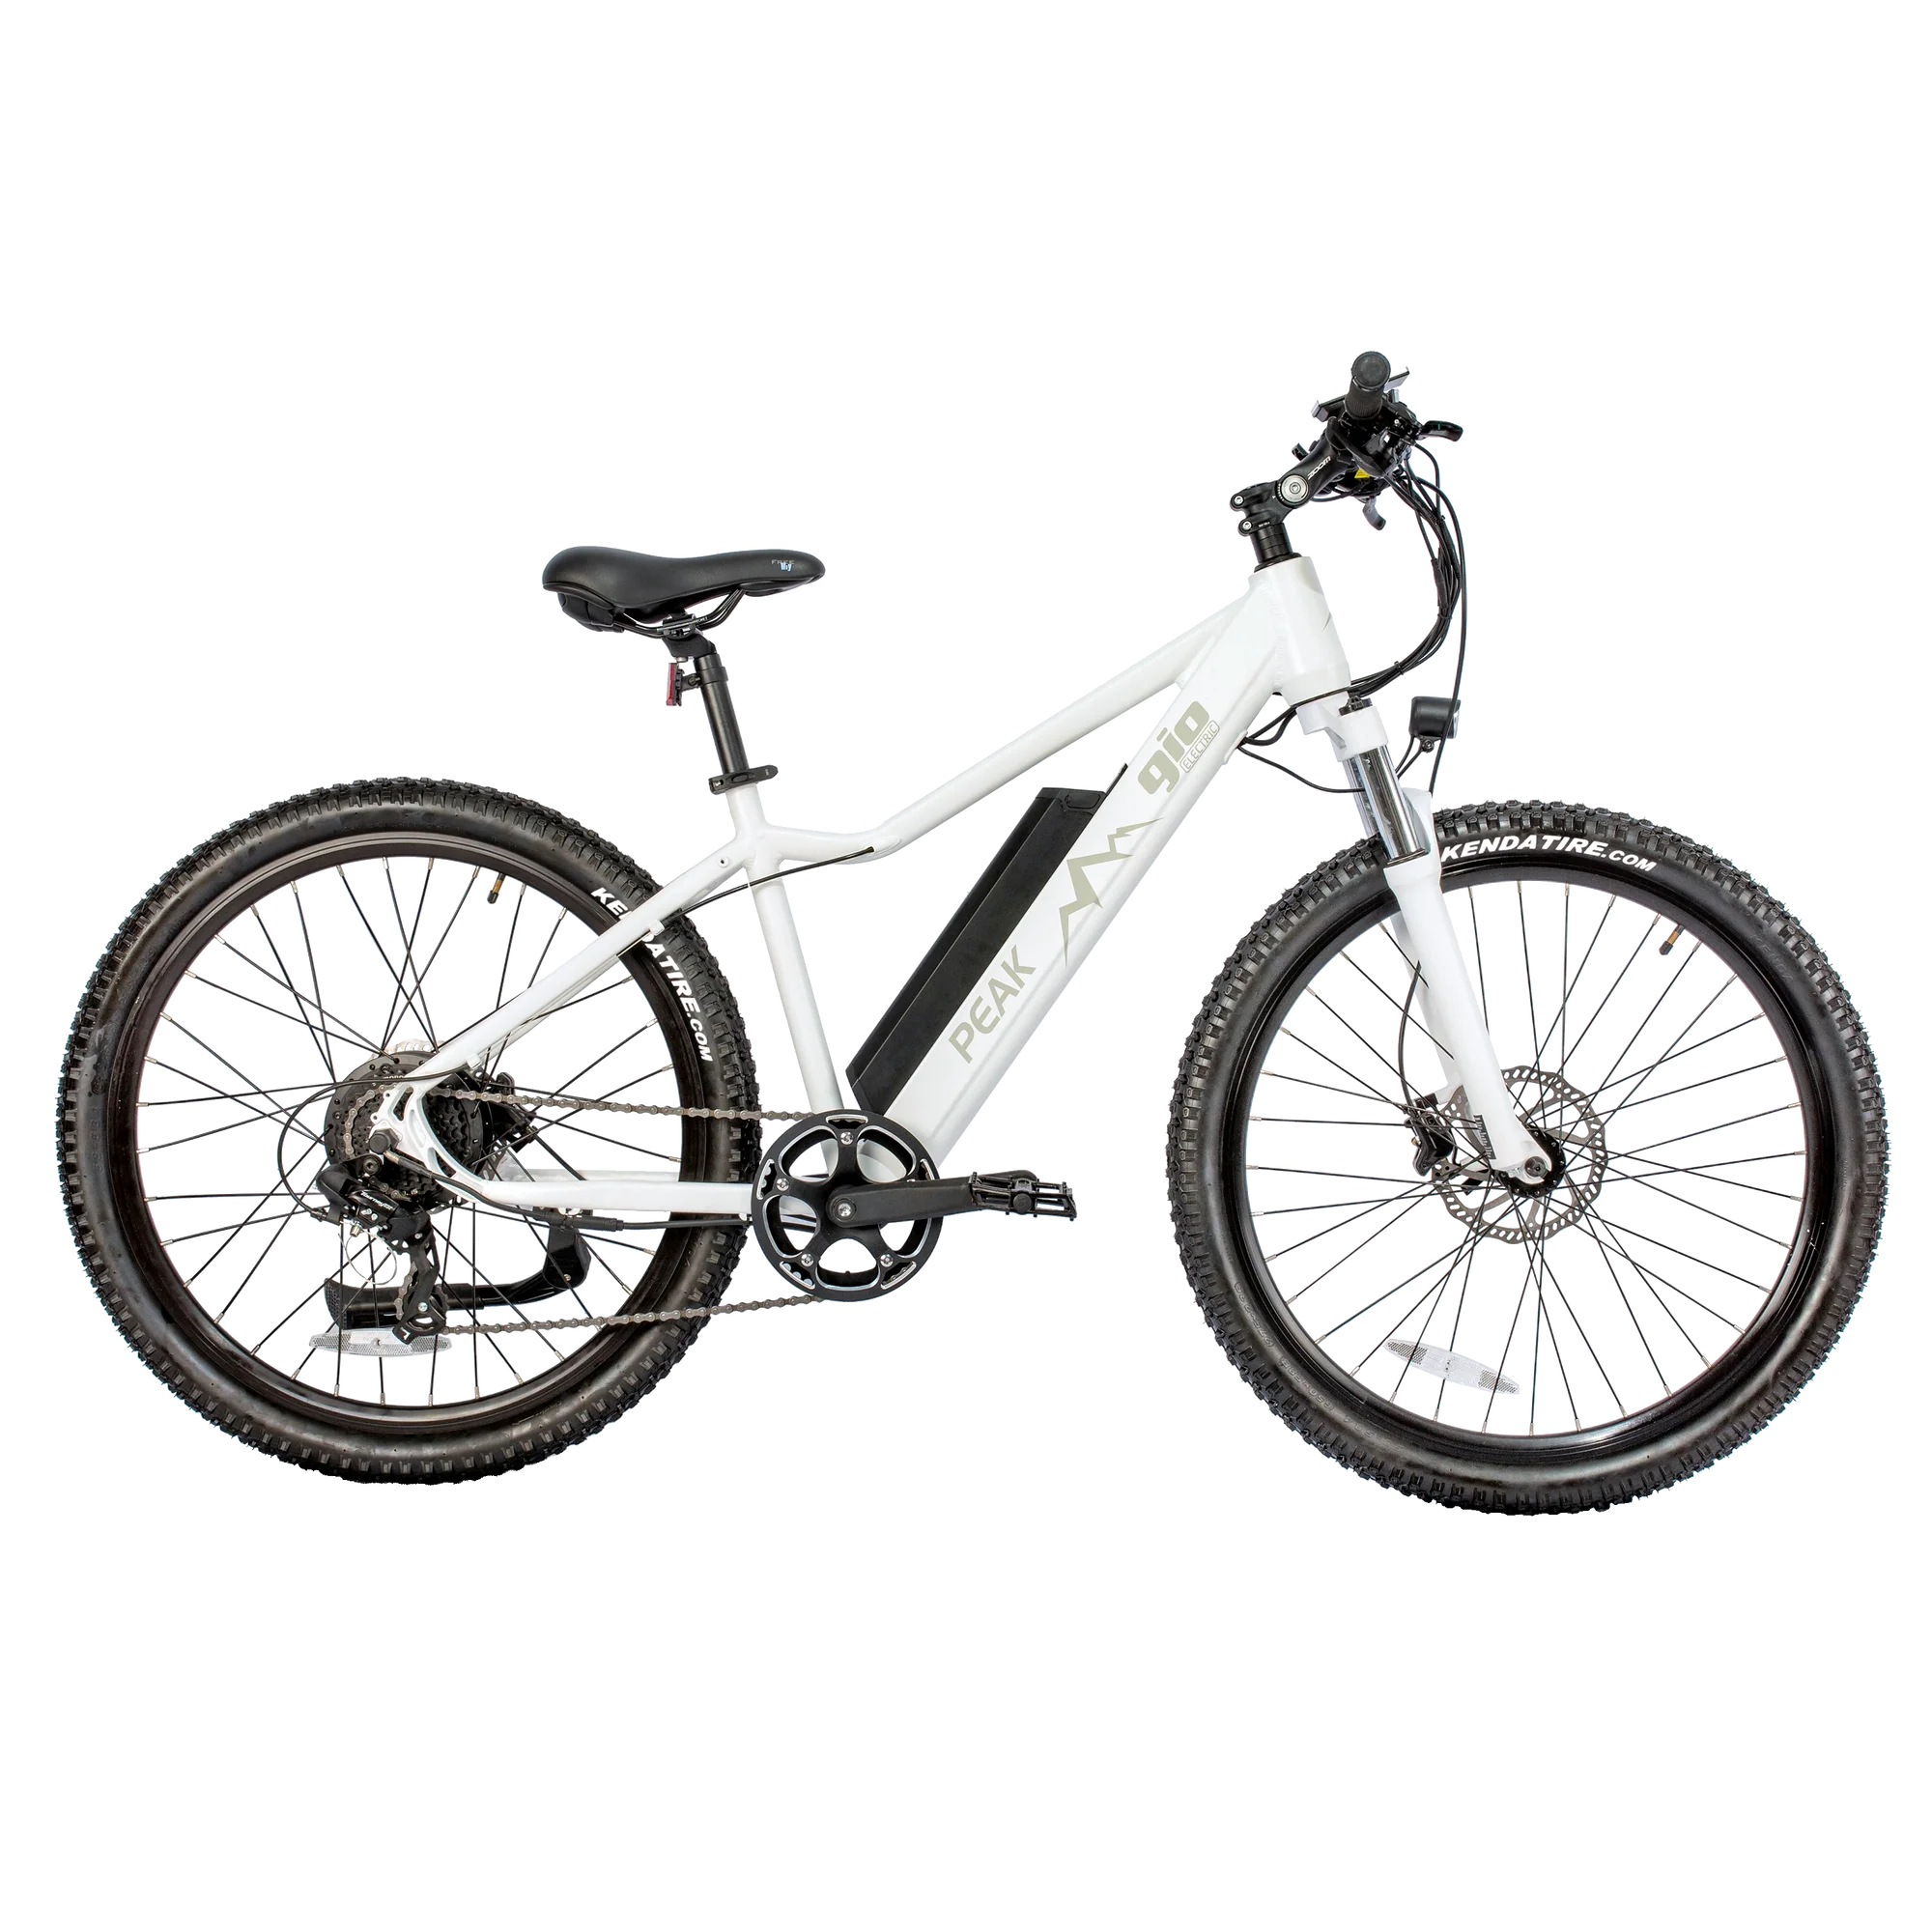 GIO PEAK ELECTRIC BIKE WHITE WITH TORQUE SENSOR CPSC 1512 TEST APPROVED